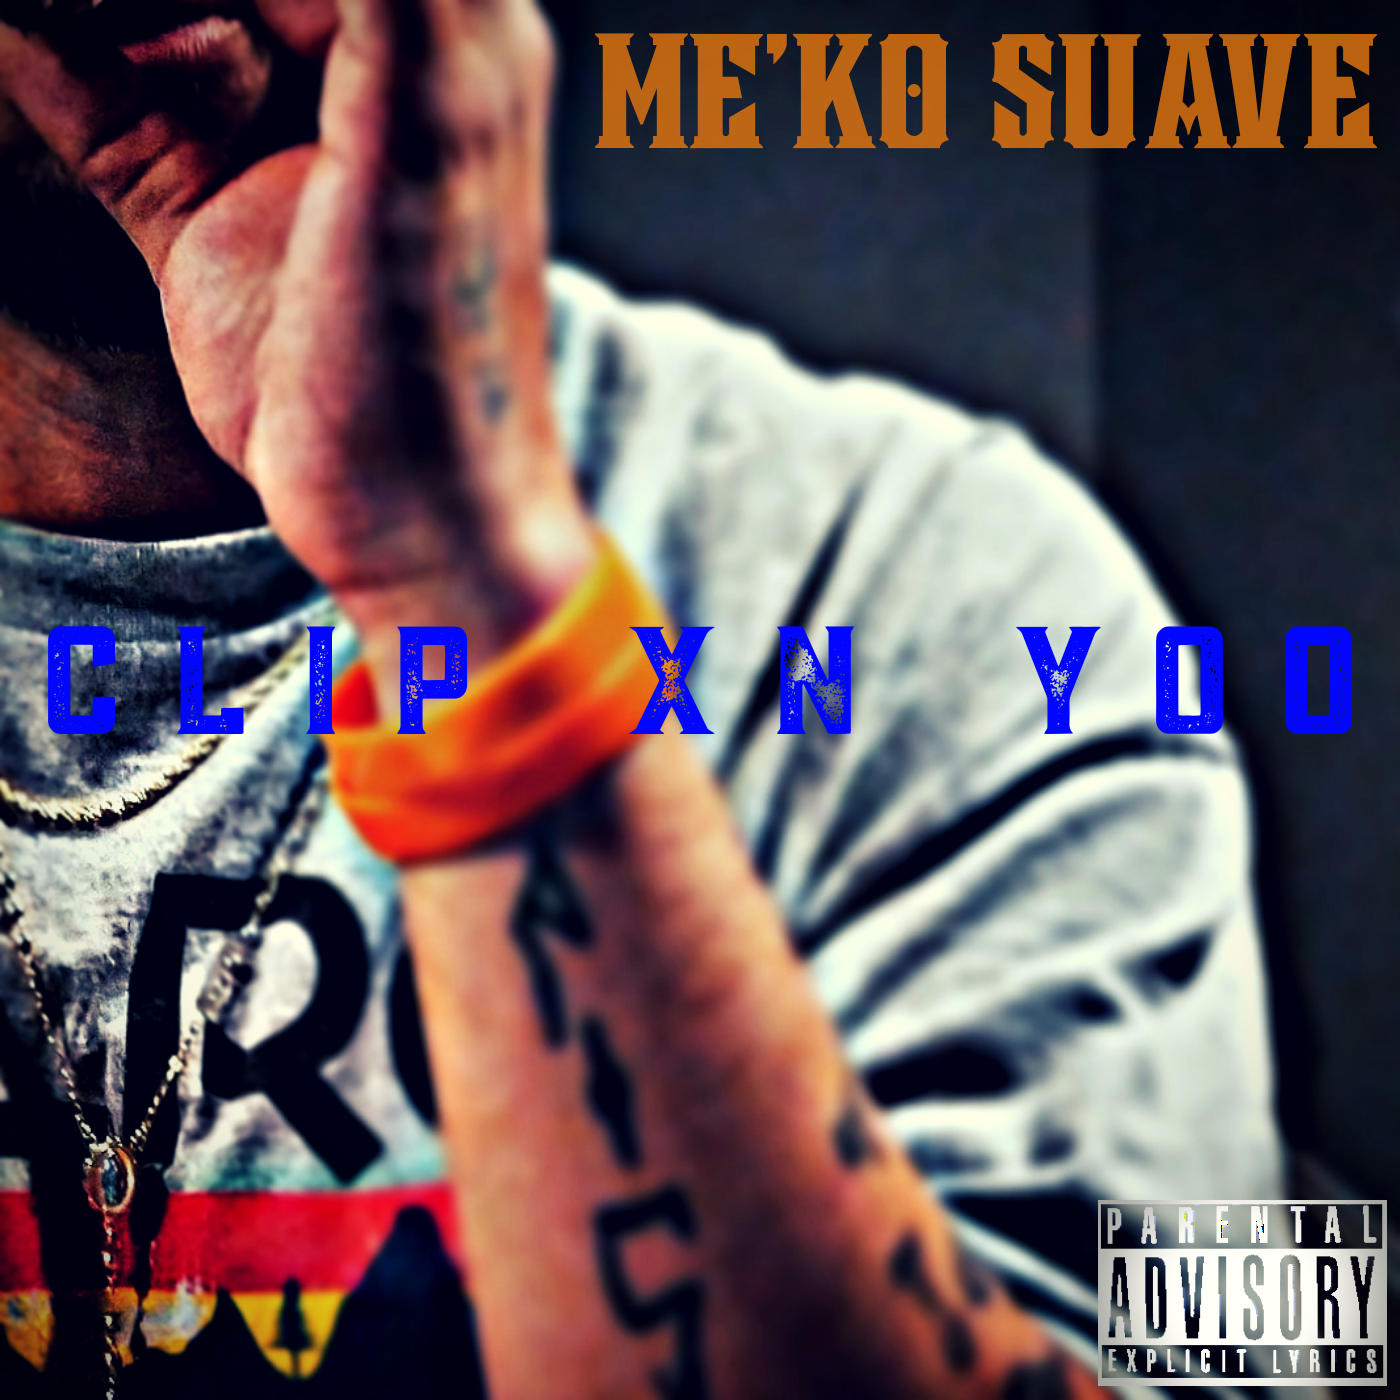 Art for Clip Xn Yoo by Me'Ko Suave